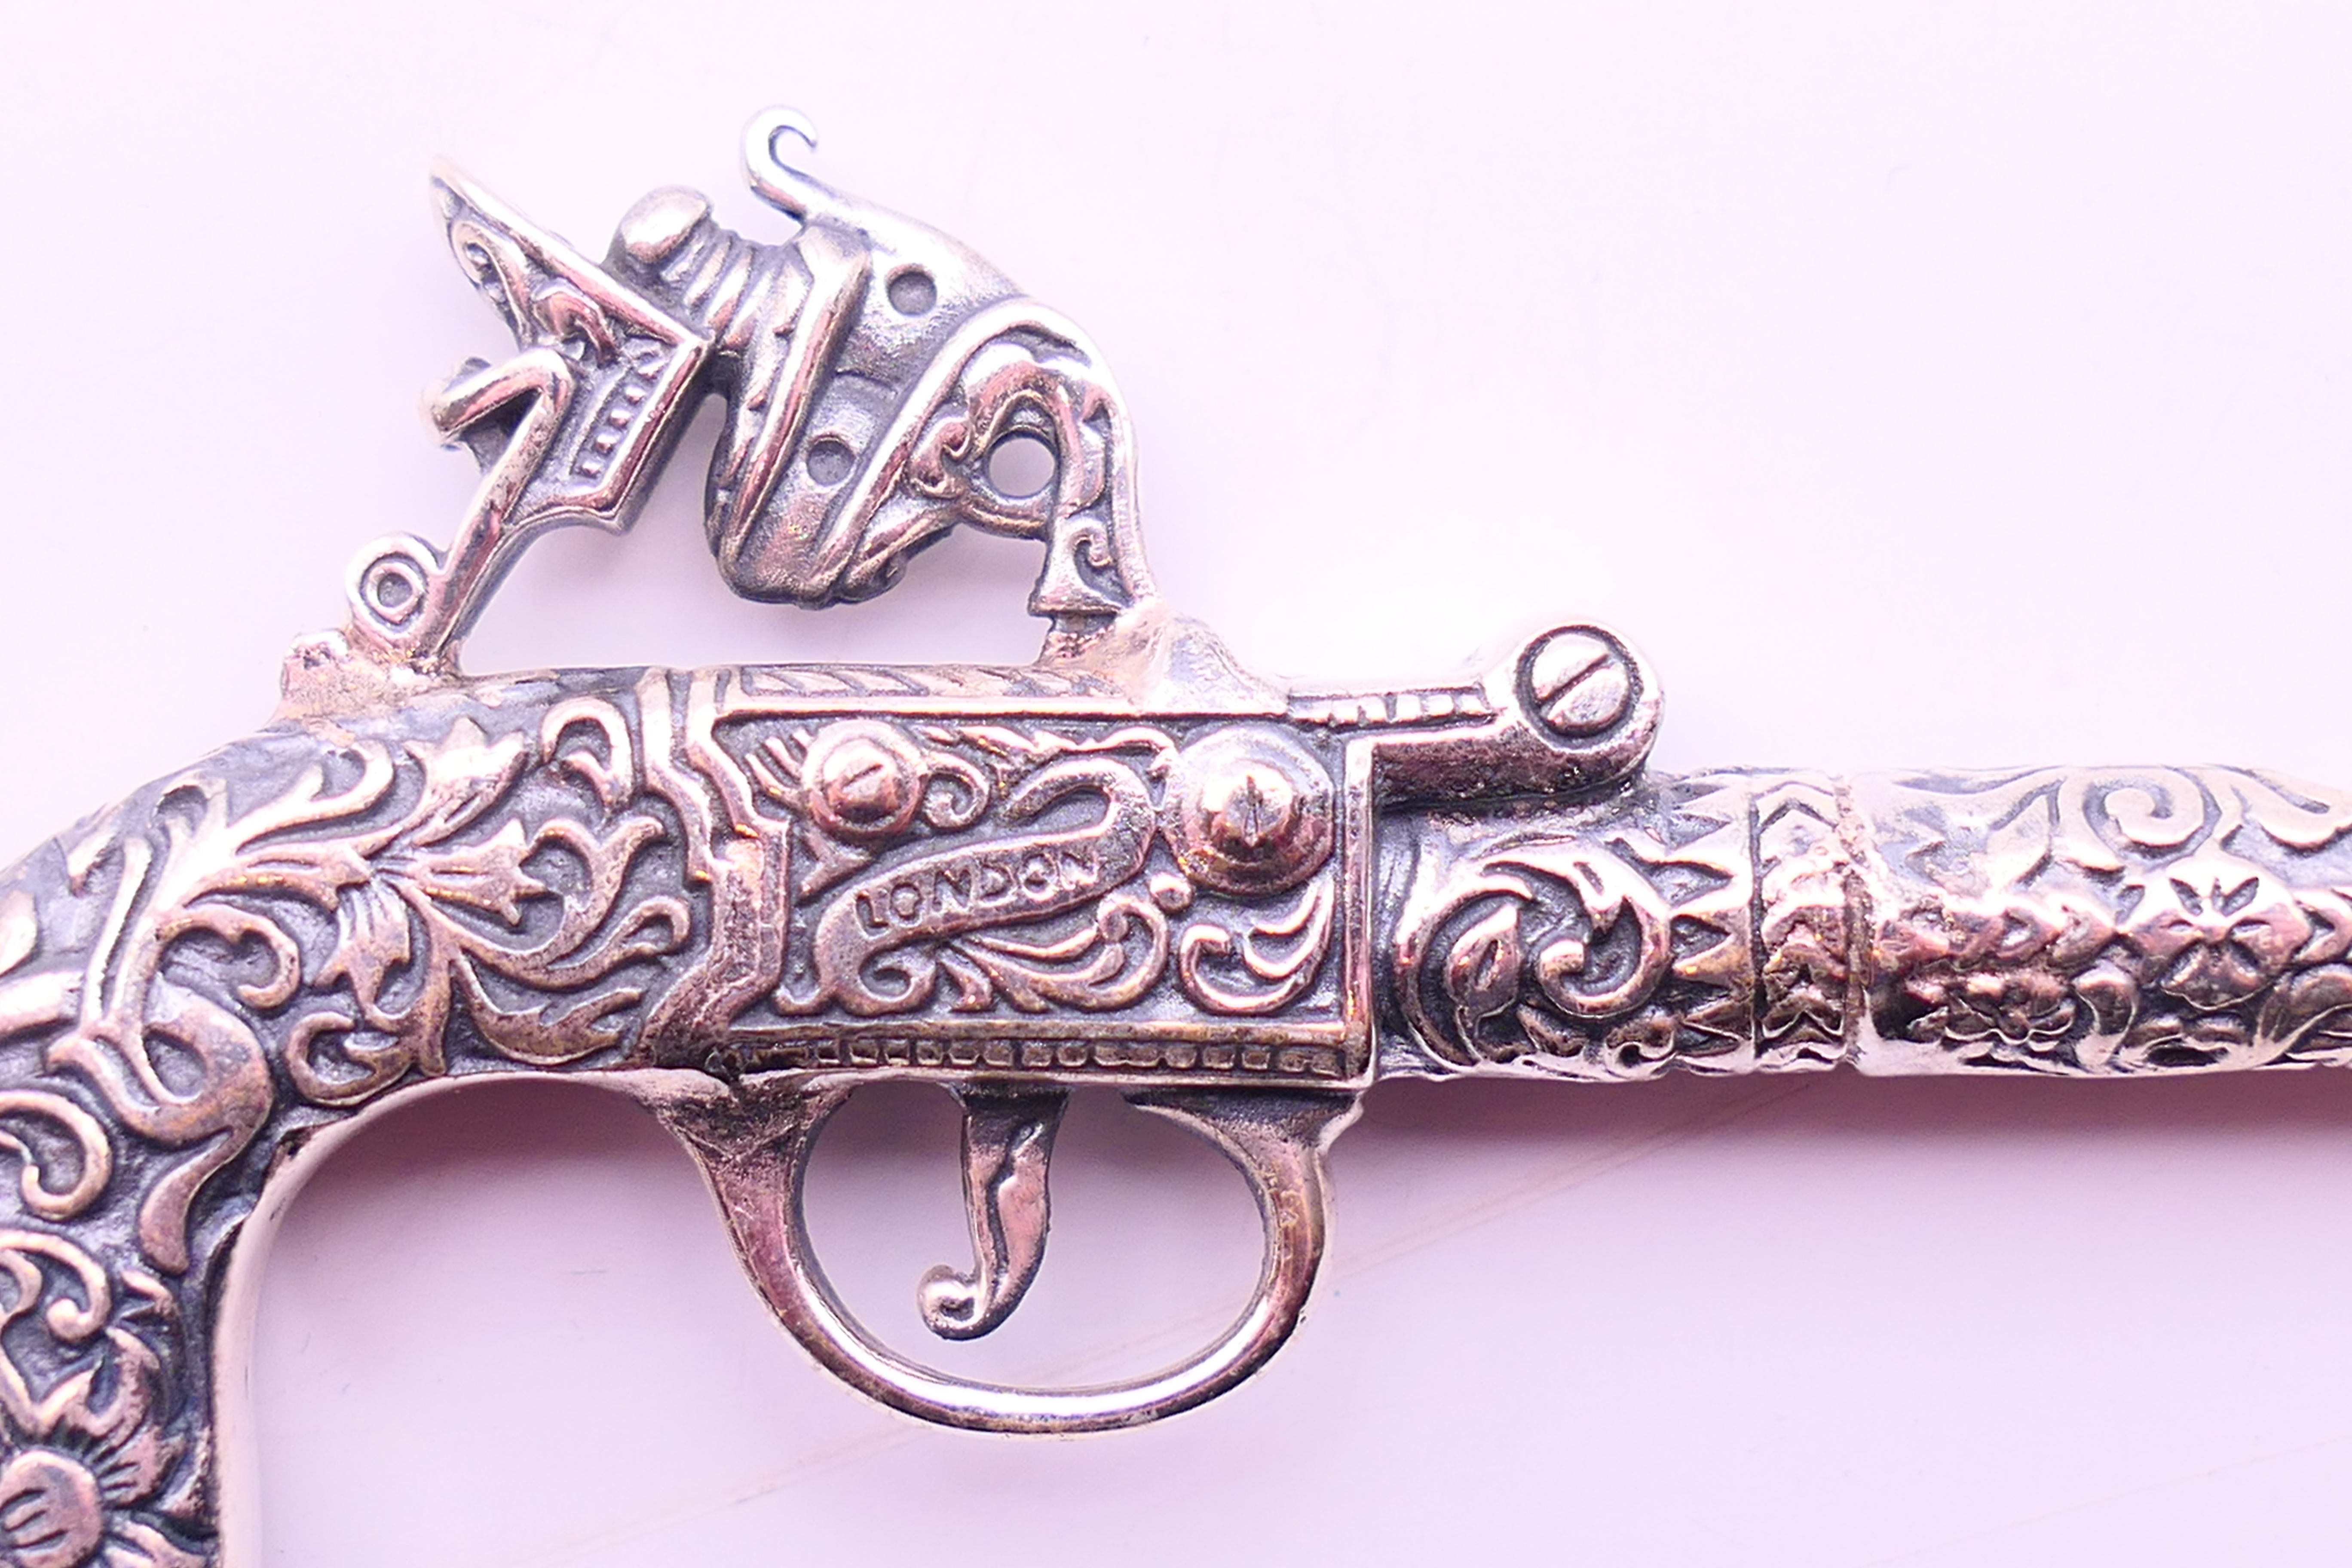 A silver pendant in the form of a pistol. 6.5 cm x 3.5 cm. - Image 3 of 3